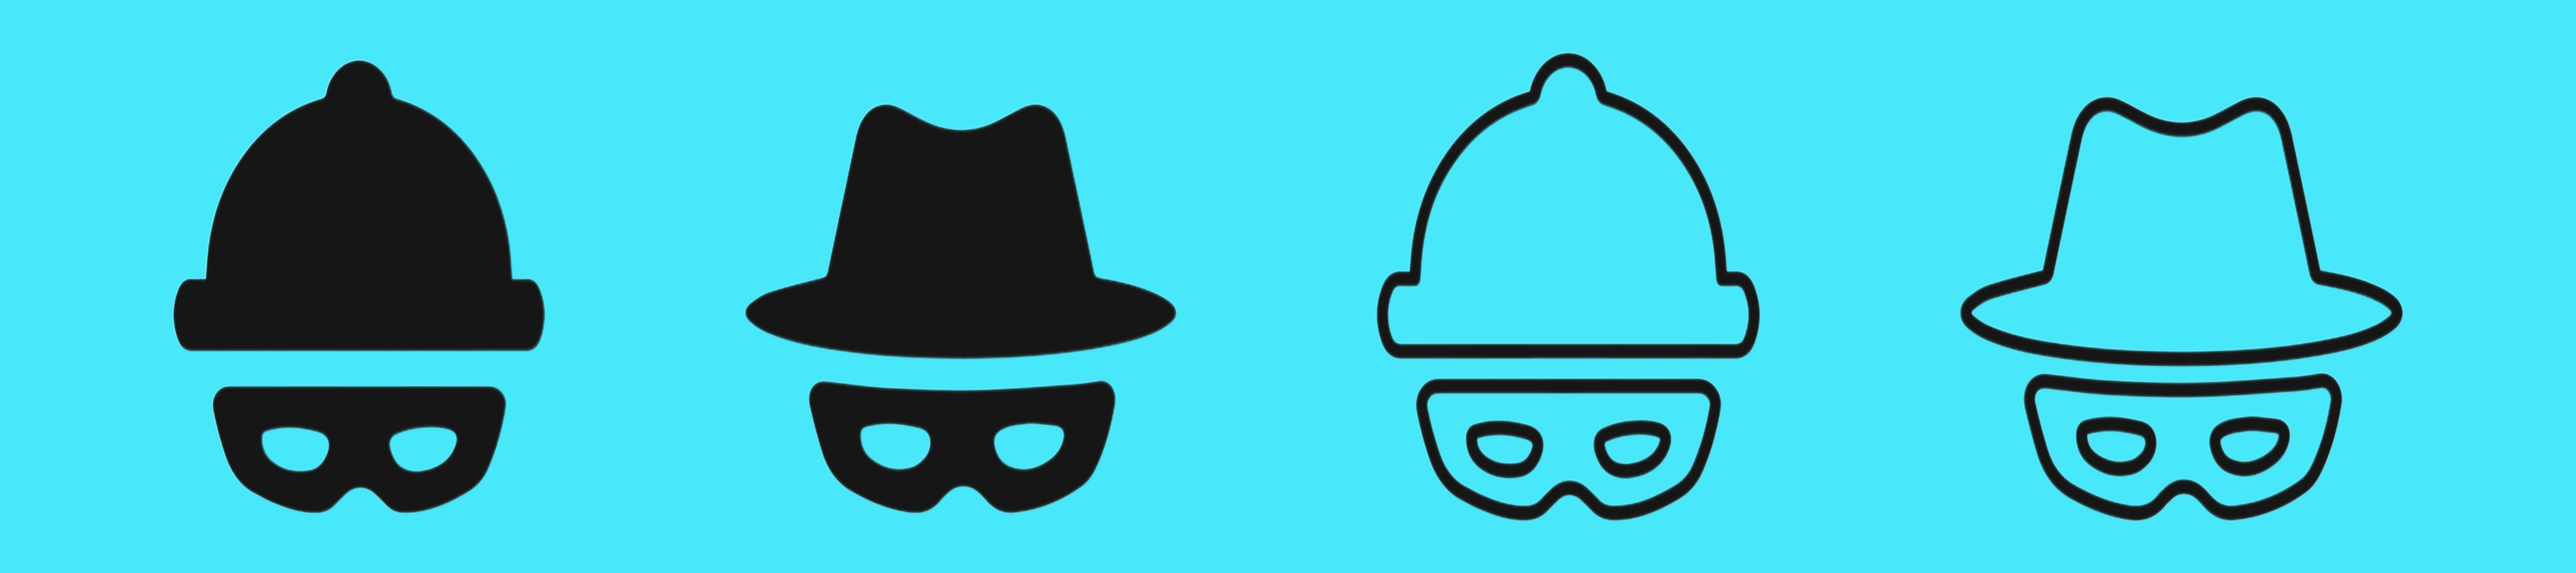 Everything you need to know about browsing the Internet in Incognito mode